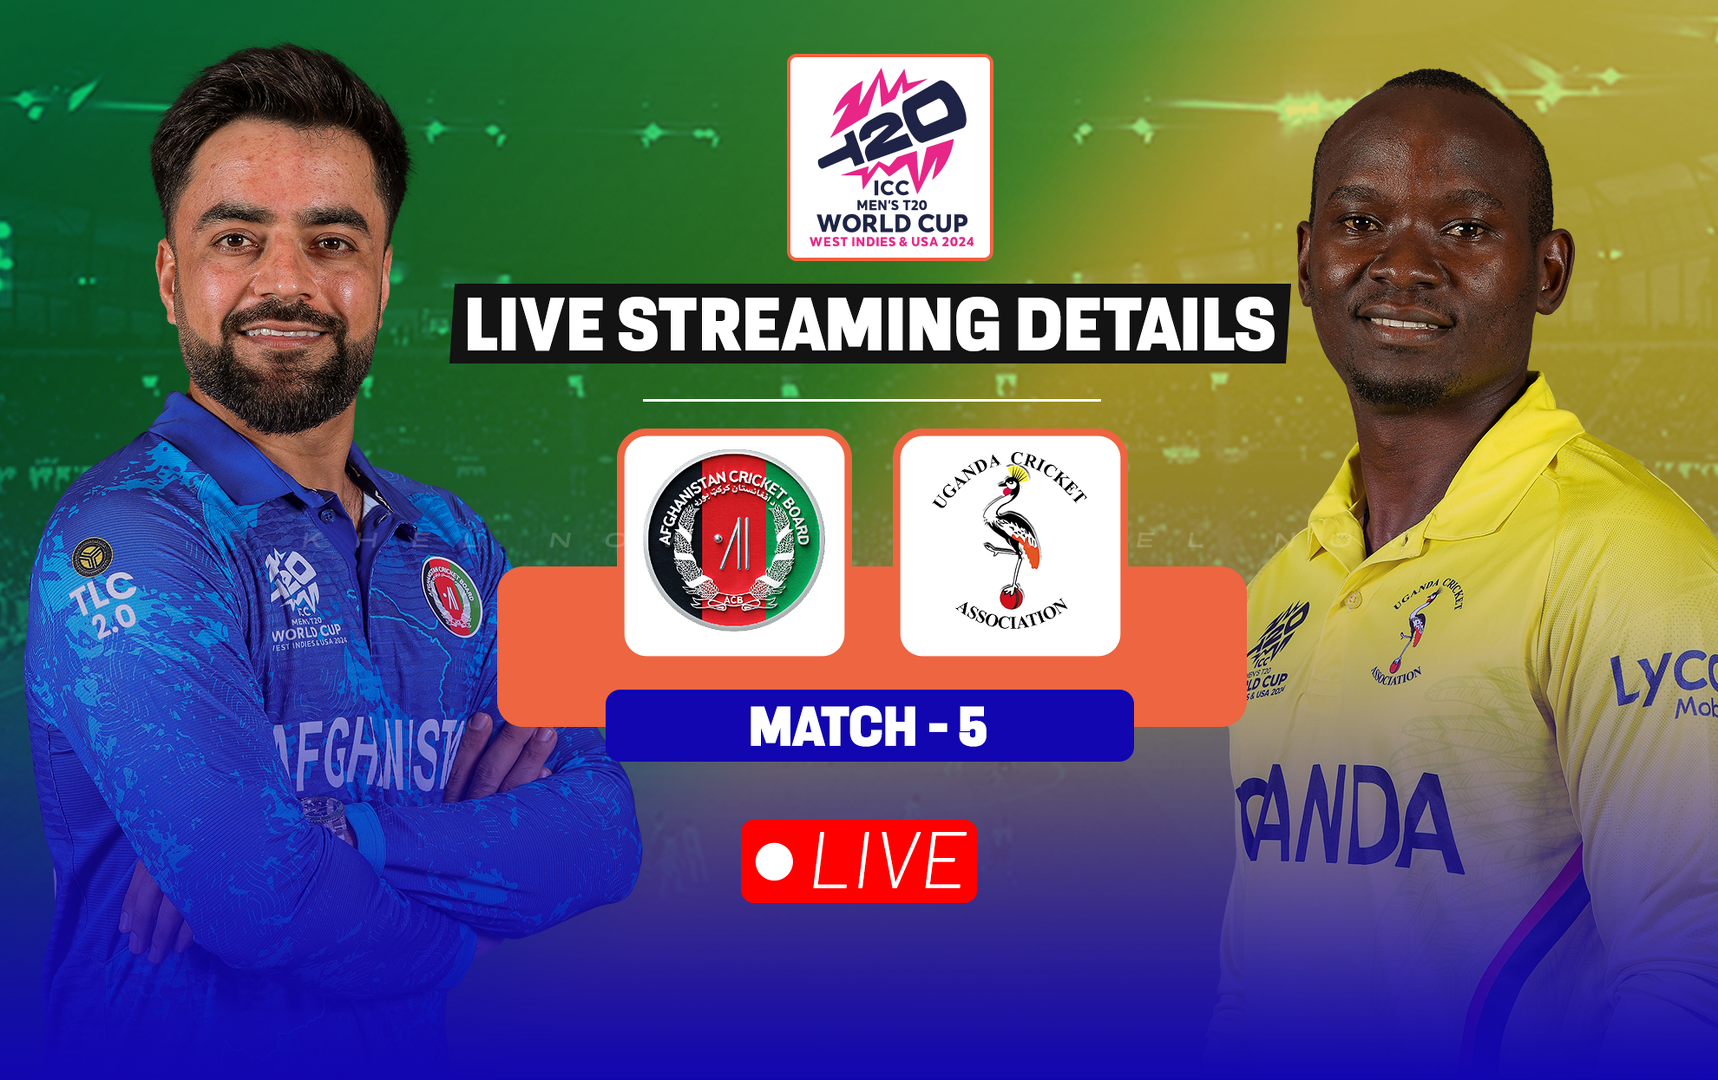 AFG vs UGA Live streaming details, when and where to watch match 5 of